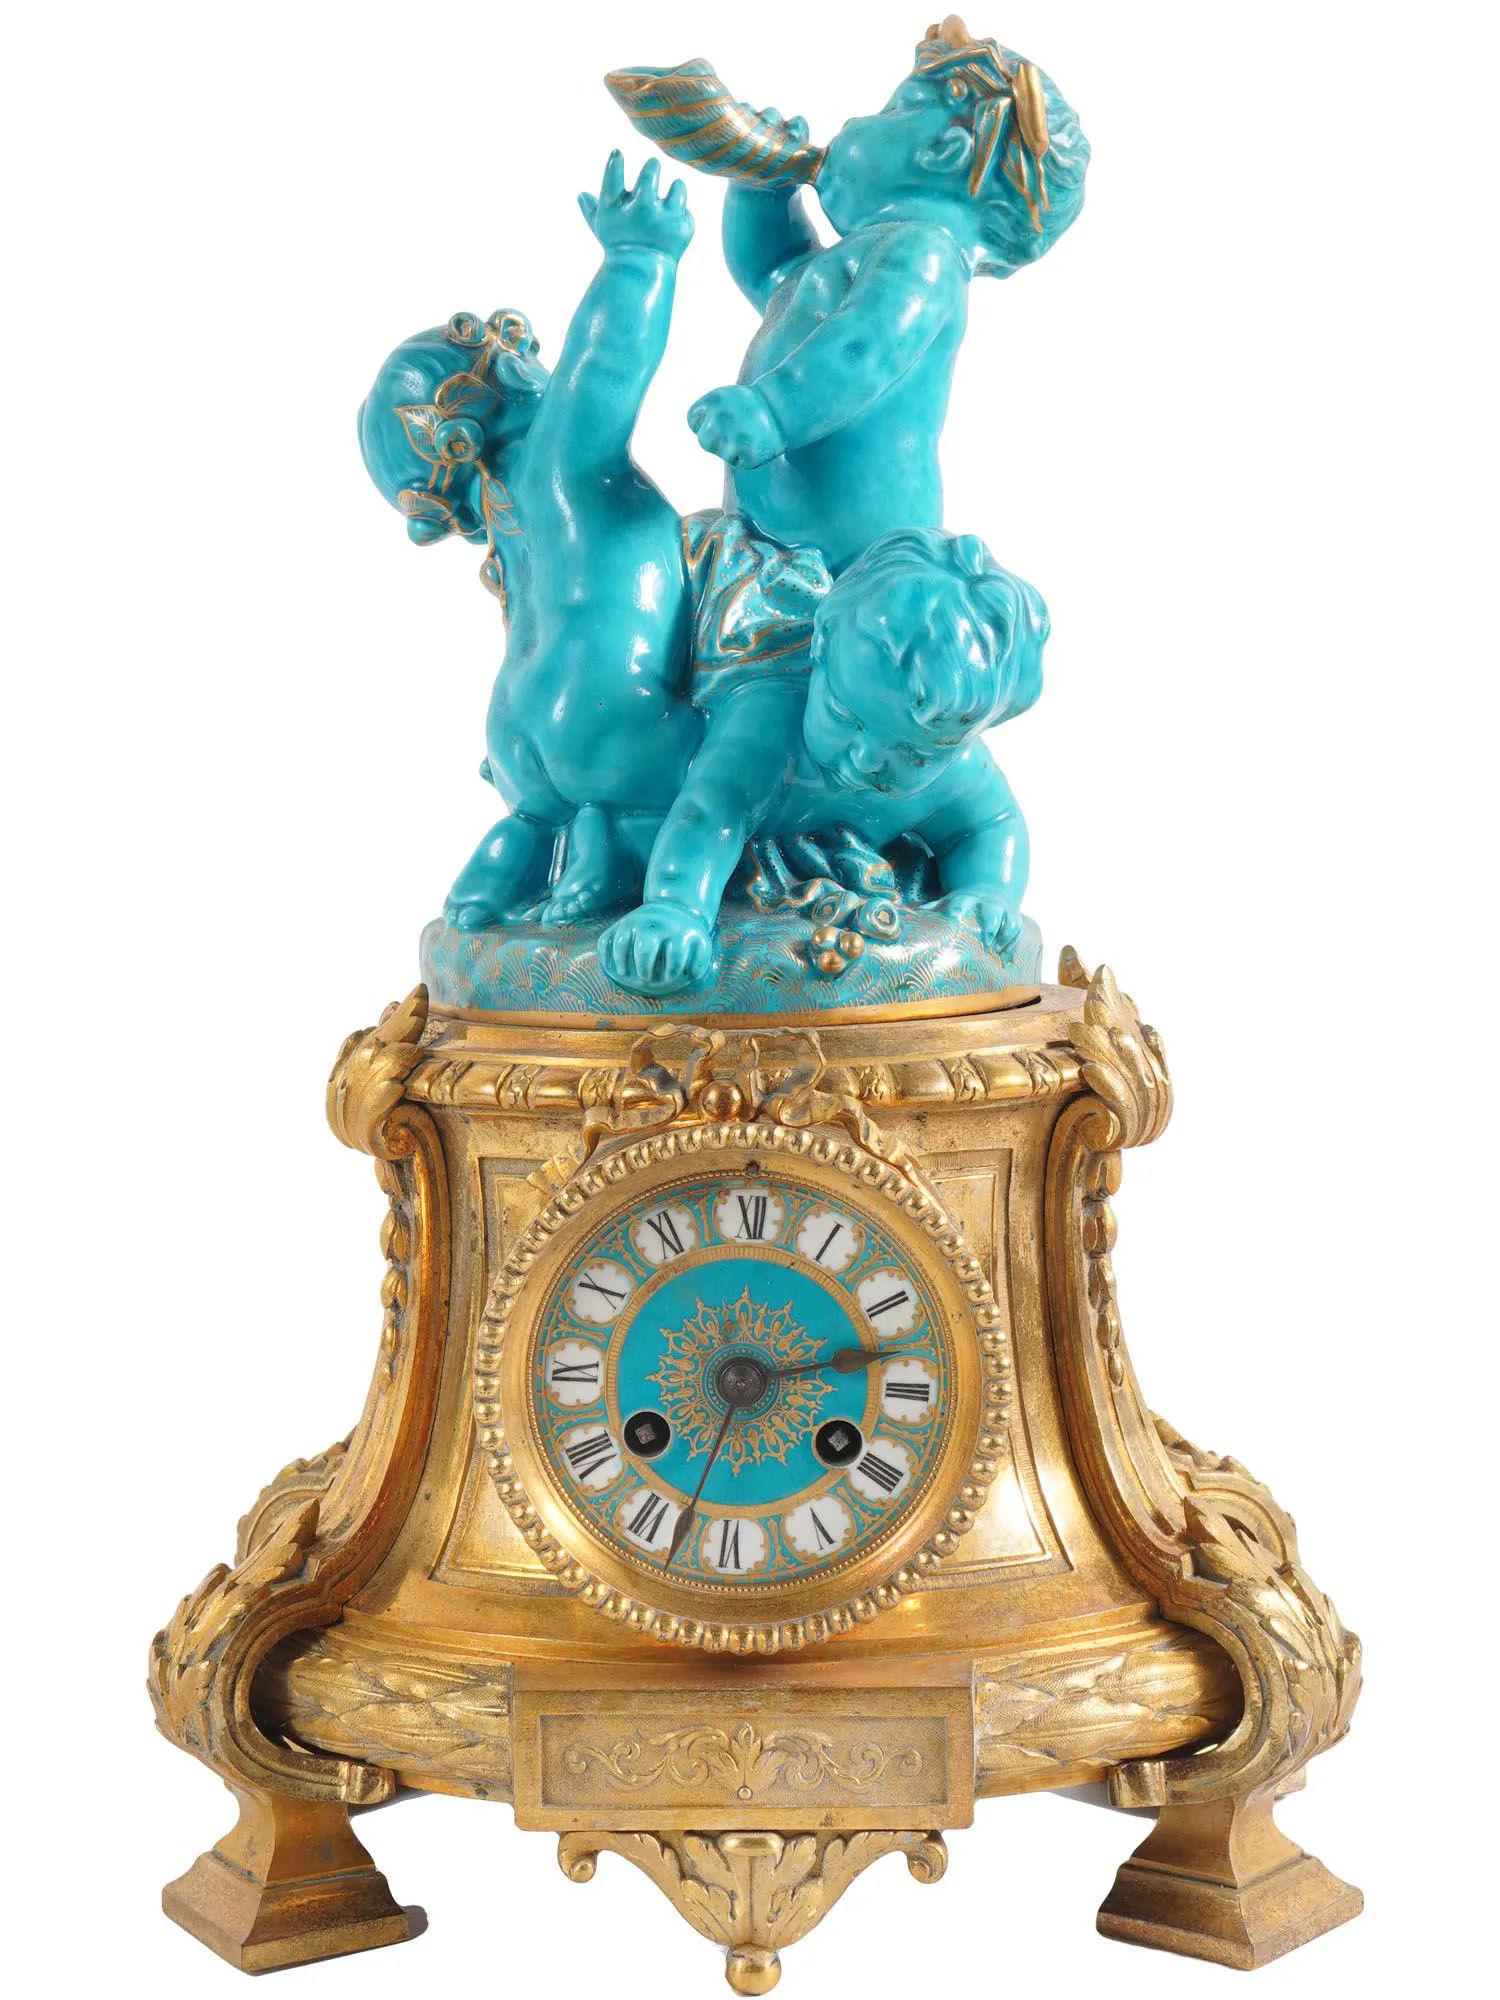 Very fine quality 19 century French Louis XVI Style celest blue sevres porcelain and bronze putti clock Garniture set.
Consisting of a clock and a pair of candelabras.